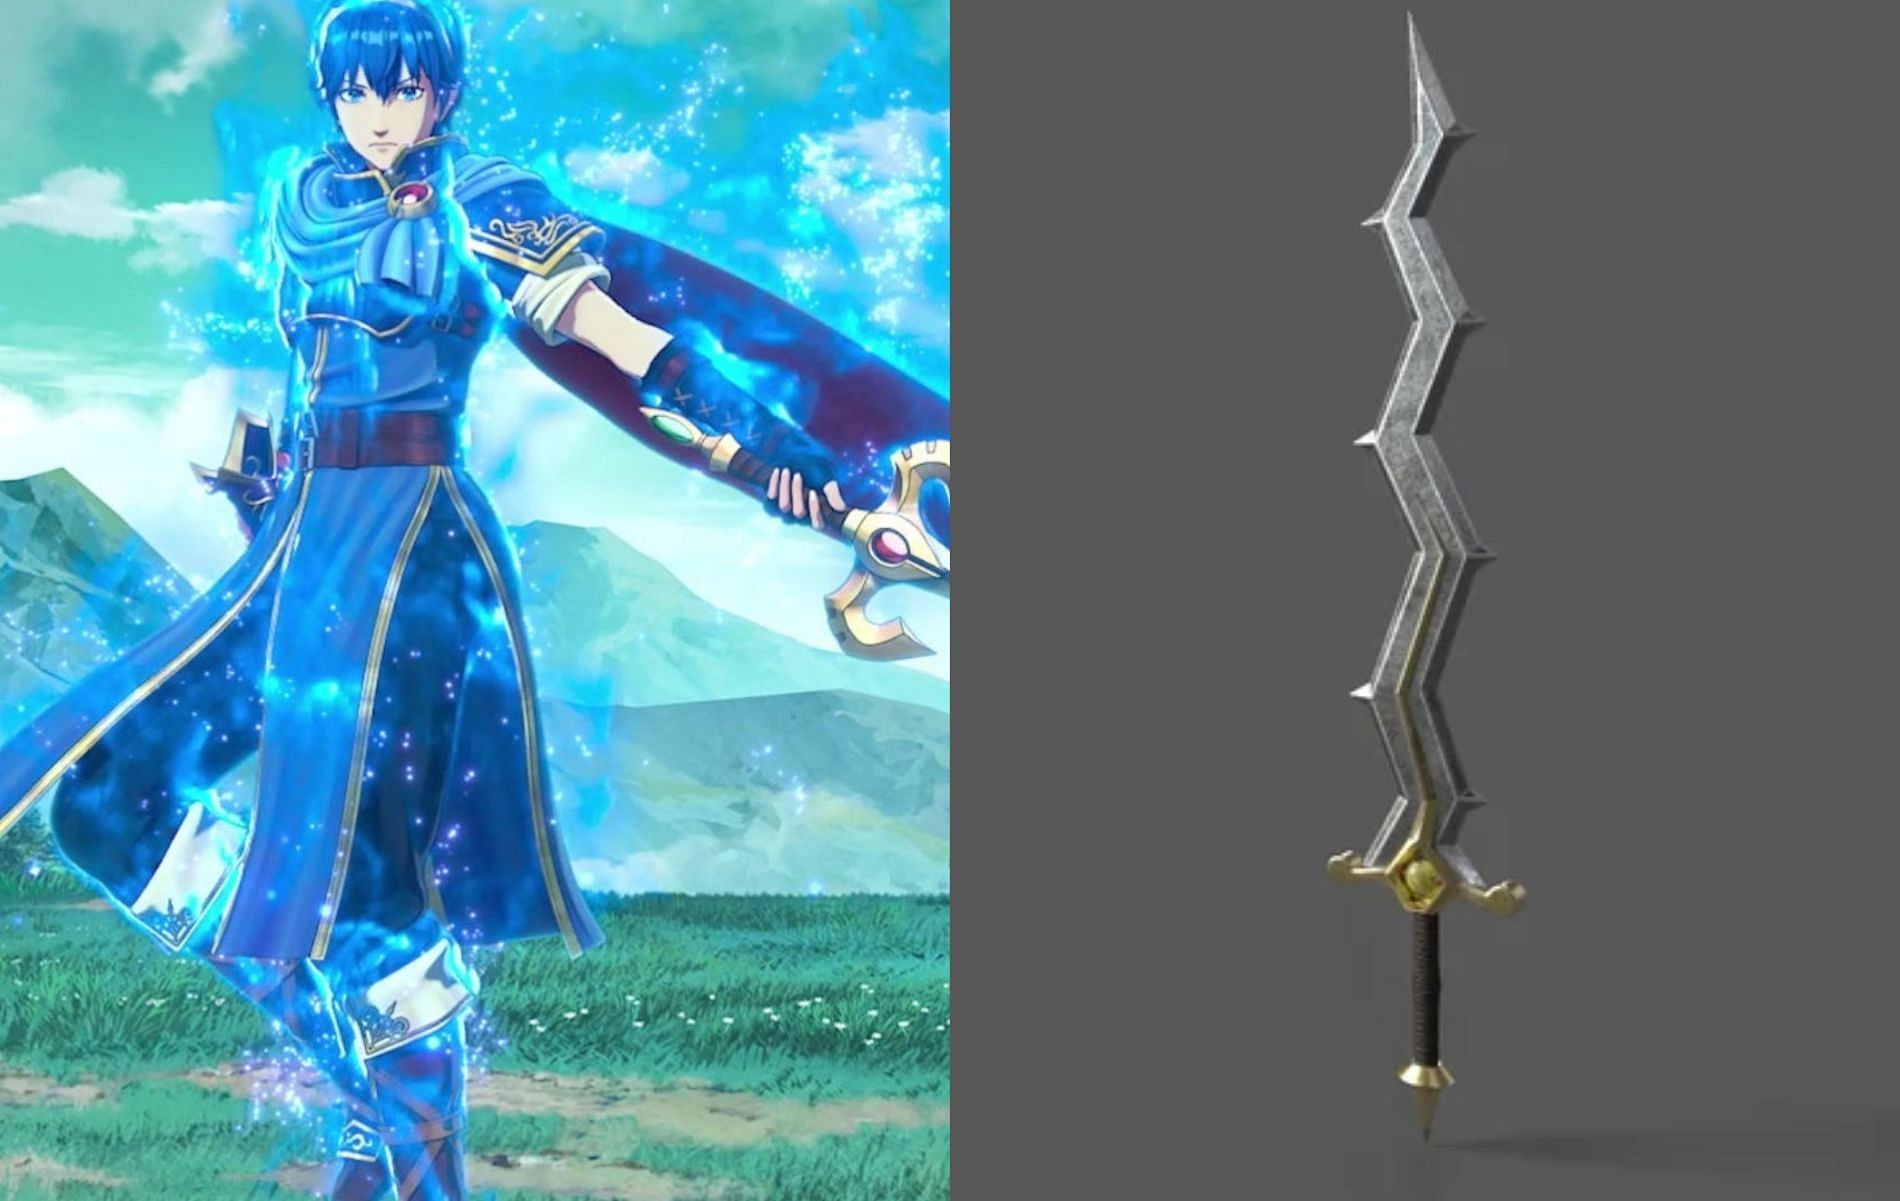 Obtaining the Levin Sword in Fire Emblem Engage (Images via Fire Emblem Engage)